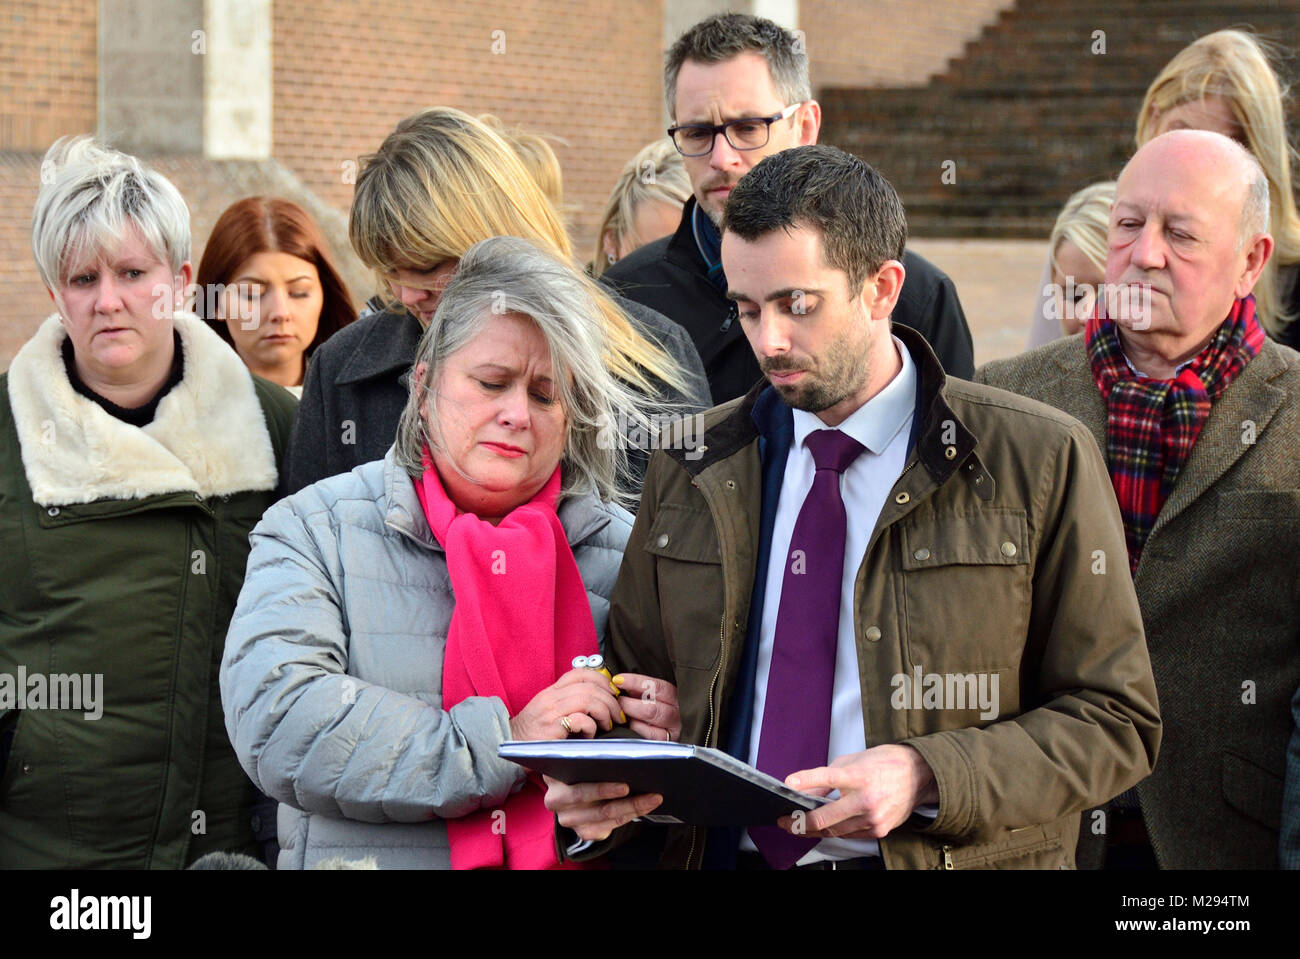 Maidstone, UK. 6th Feb. The family of 23 year old Molly McLaren leave Maidstone Crown Court and make a statement after seeing her ex-boyfriend Joshua Stimson (26) sentenced to life in prison with a minimum of 26 years for her murder in Chatham in June 2017. Her mother, Joanne McLaren, and Sergeant Ali Walton reading out the statement. Credit: PjrFoto/Alamy Live News Stock Photo